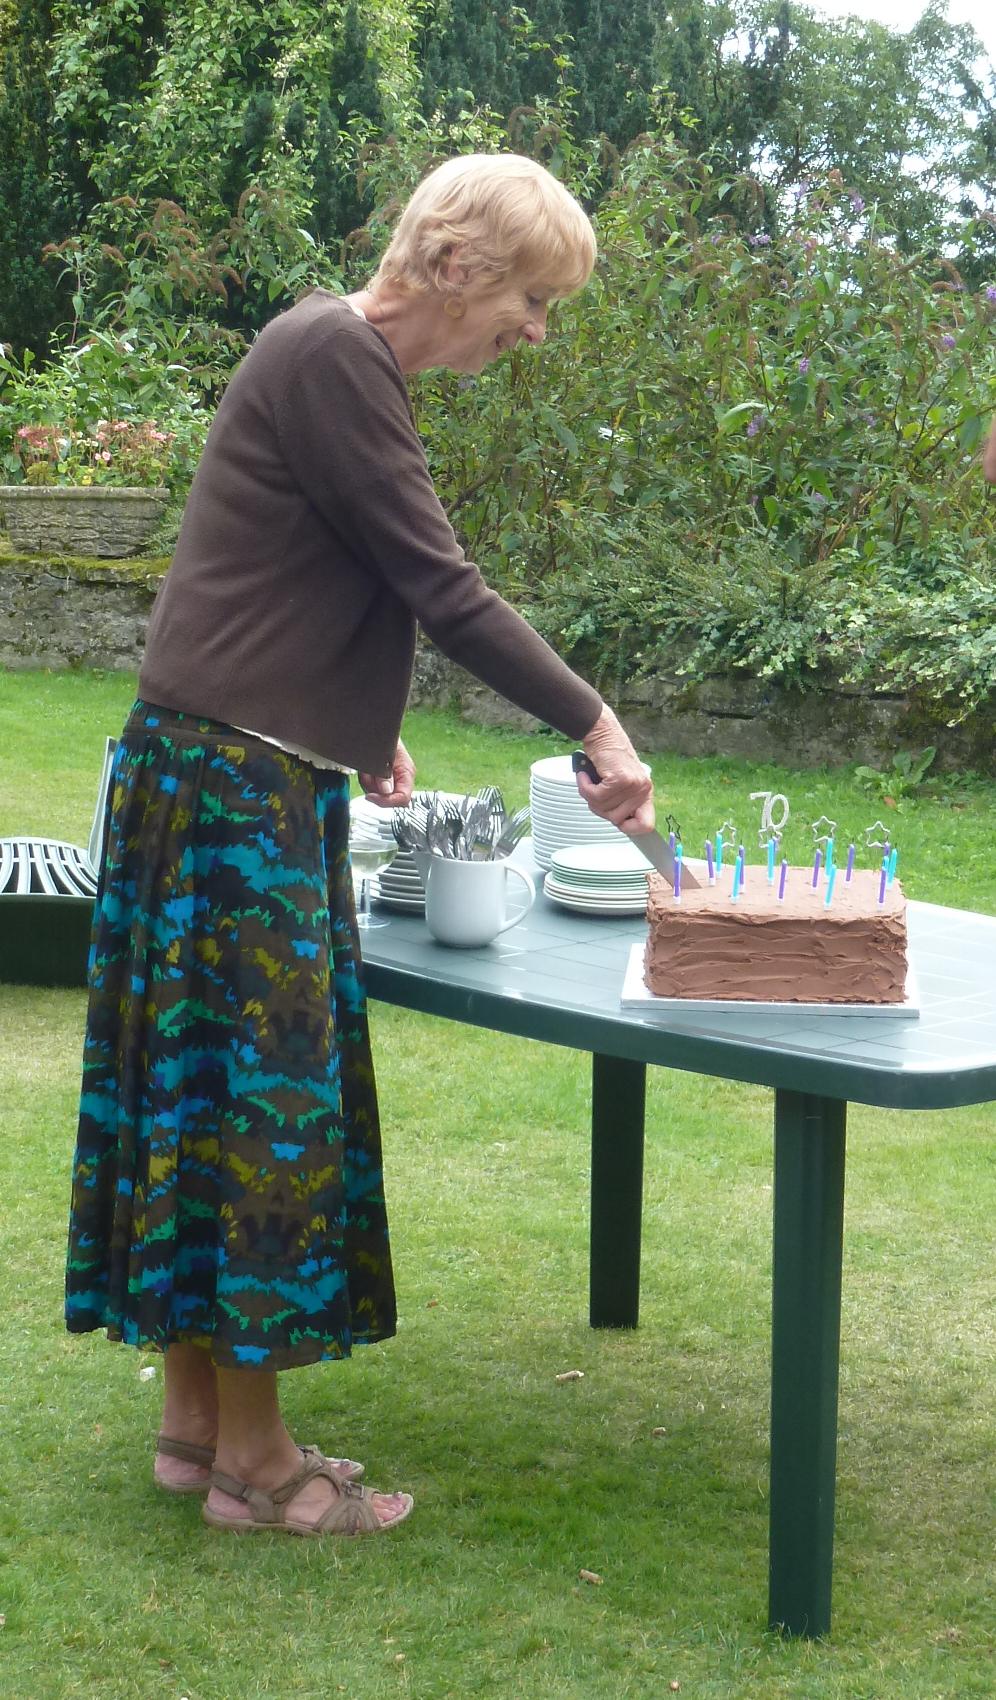 Saturday 23rd August, Cutting the cake. Photo by Dave & Jane Cadd